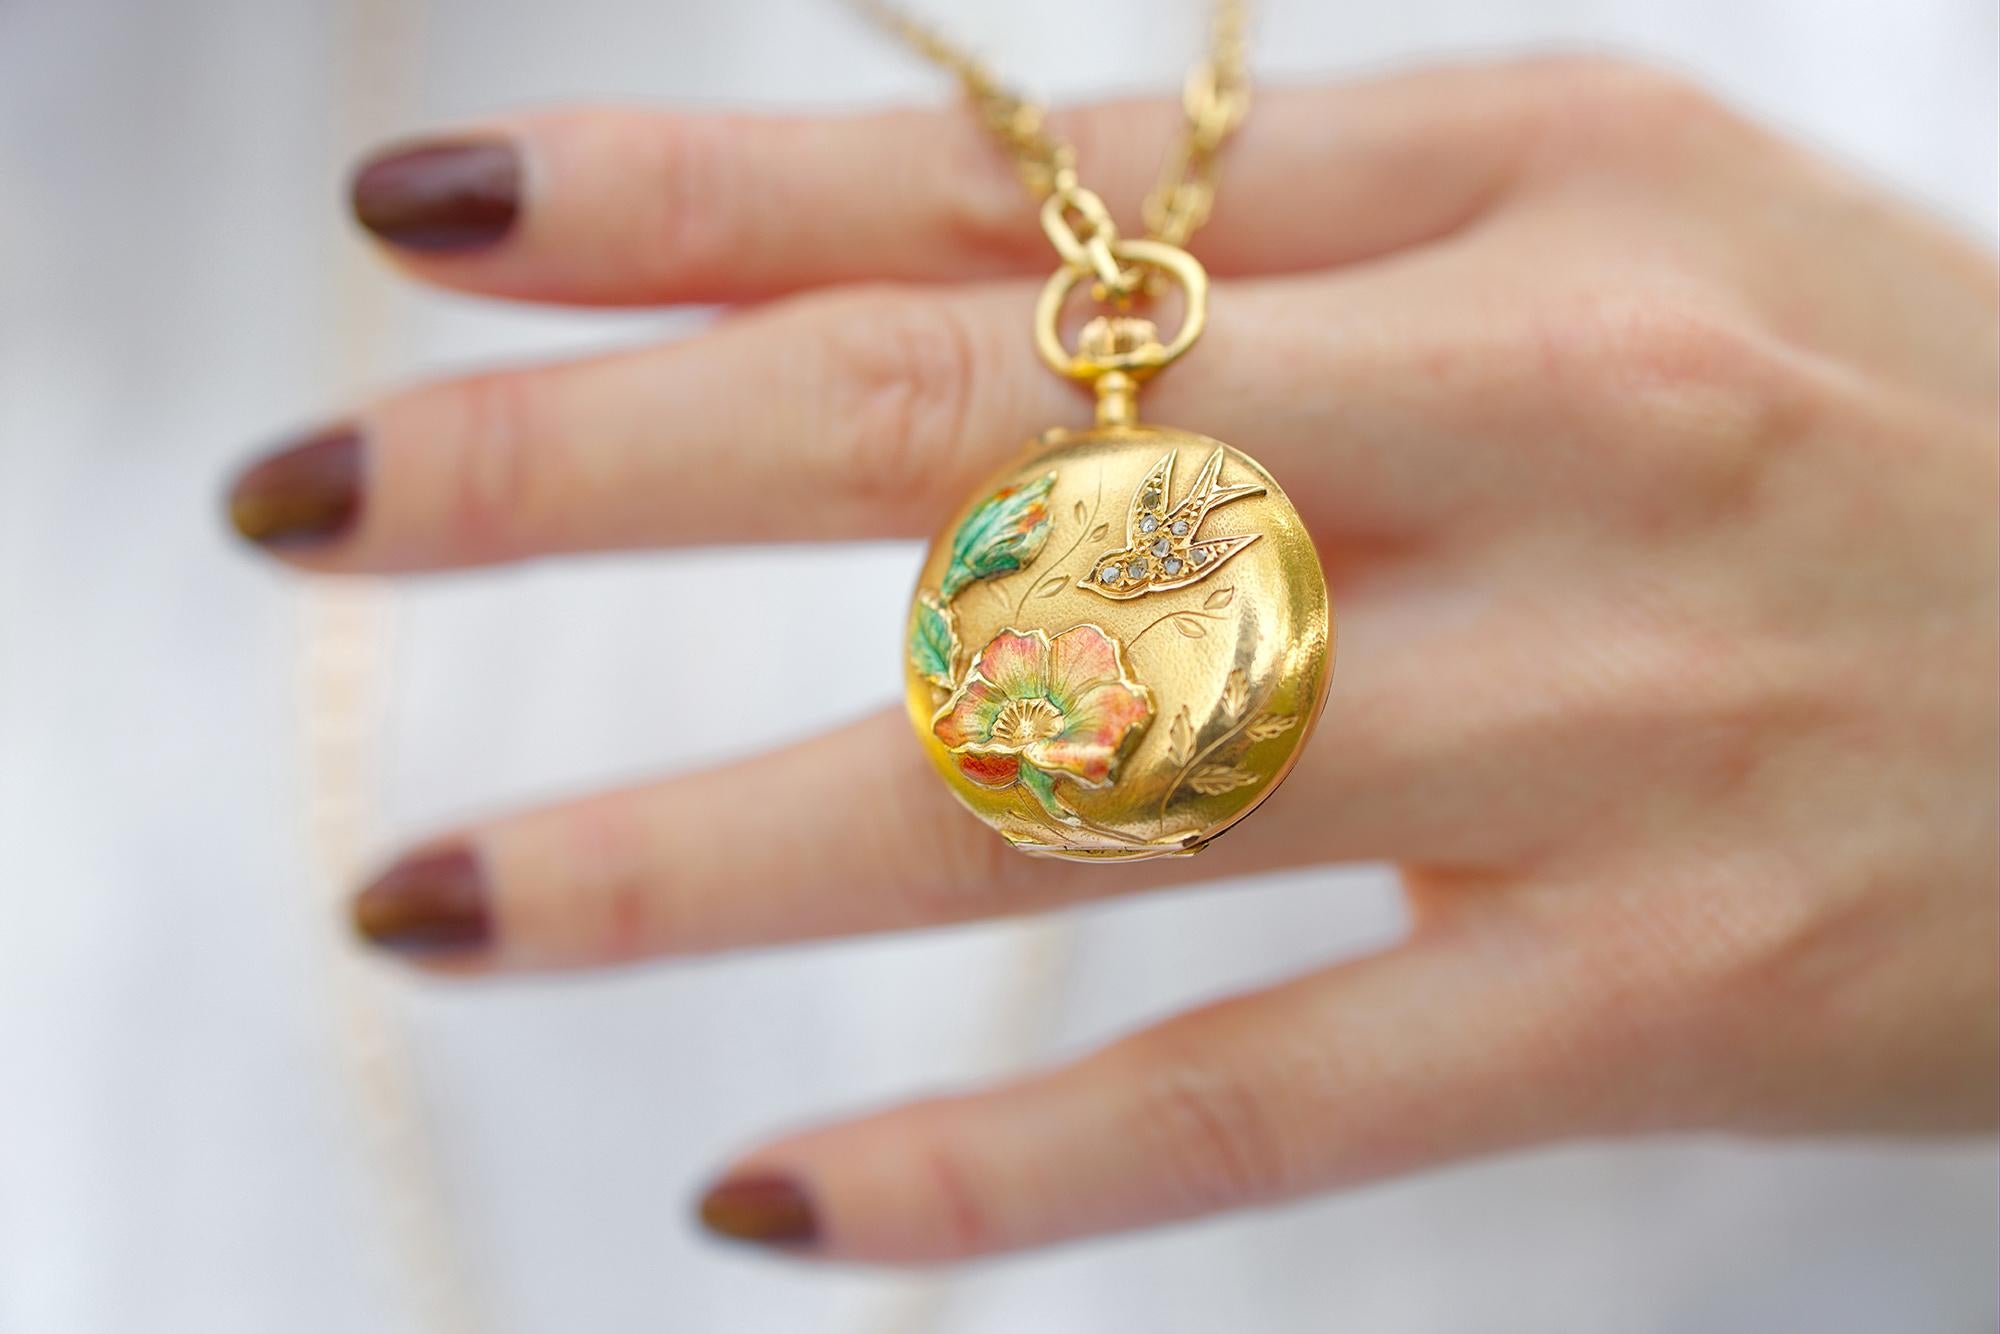 For sale a beautiful French work, Art Nouveau era, pocket watch pendant with one swallow and enameled lily flower with its leaves. The swallow is set with 8 diamonds in rose cut style, and the floral motifs are enameled in green, red and gold with